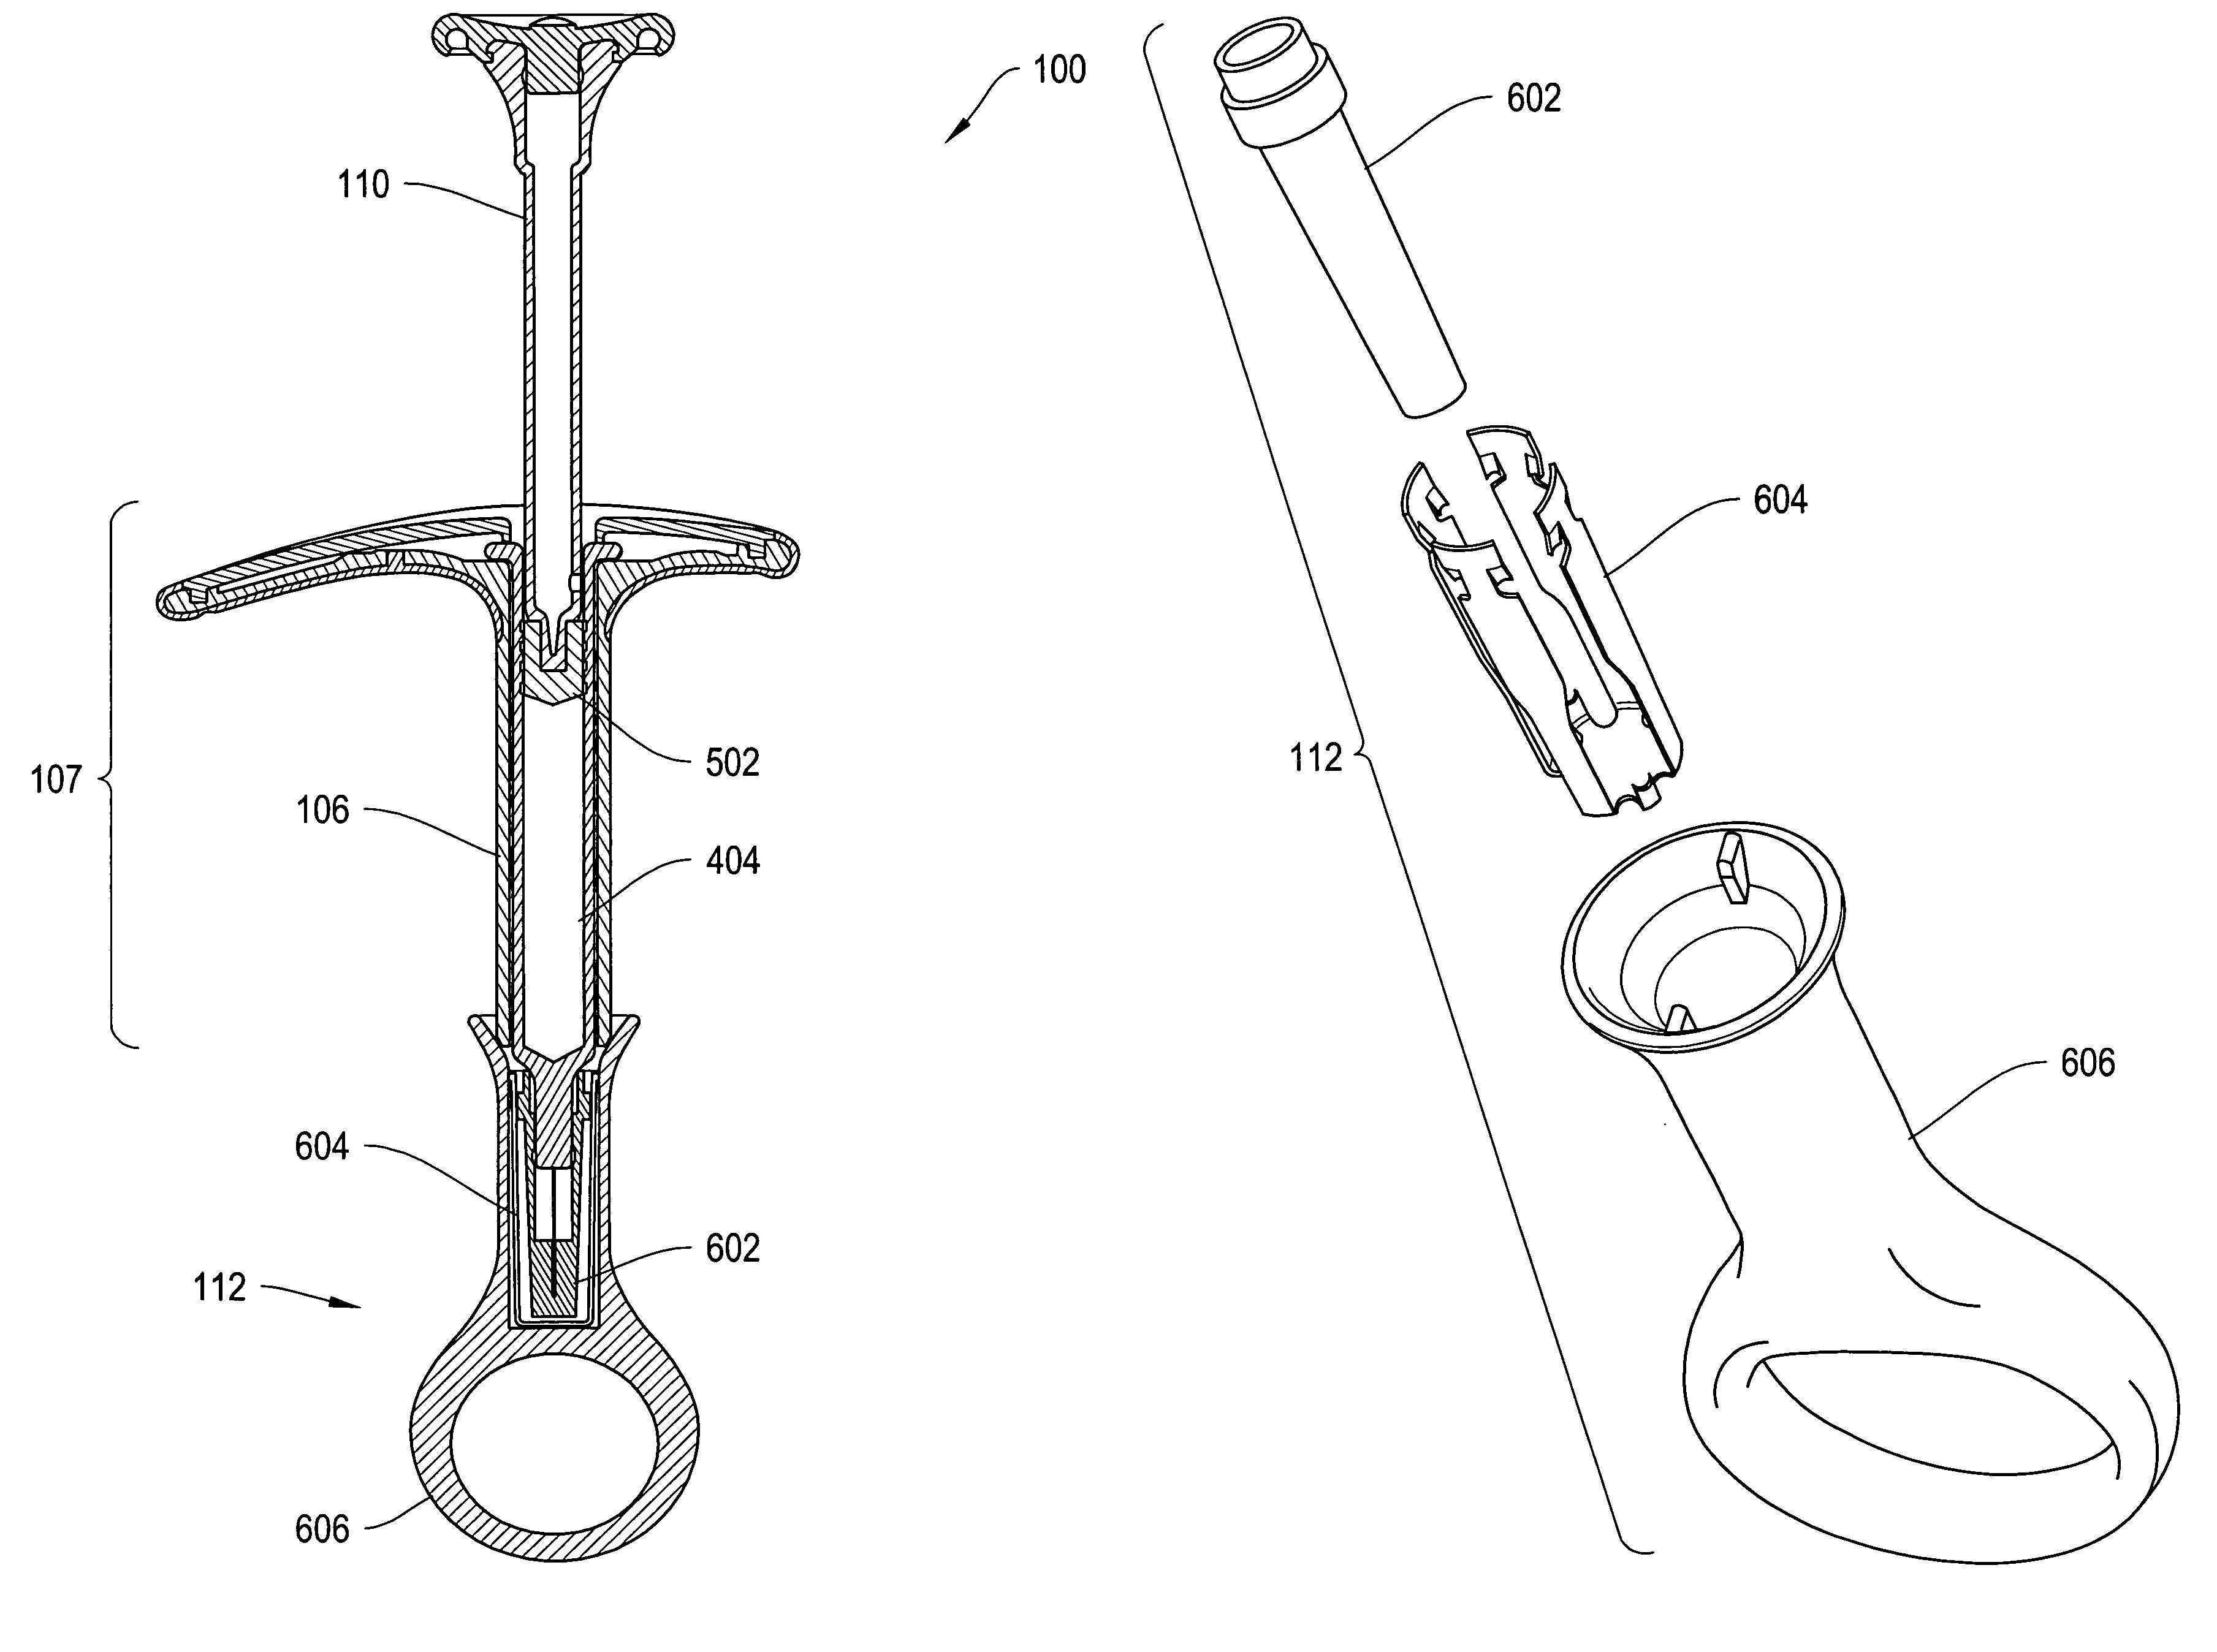 Systems and methods for administering medication